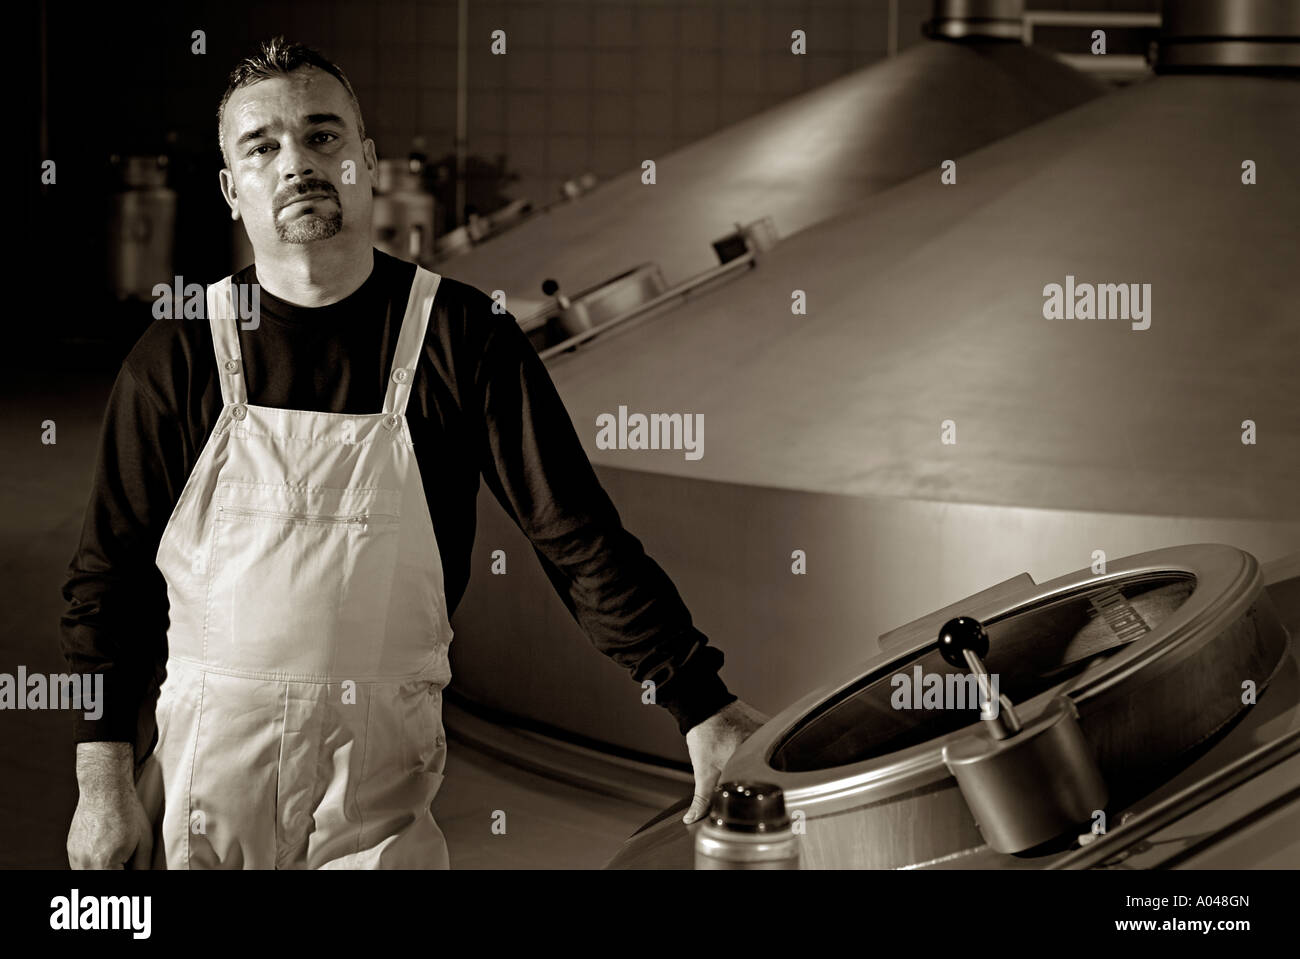 Brewery Worker Standing Next to a Large Fermentation Vat Stock Photo